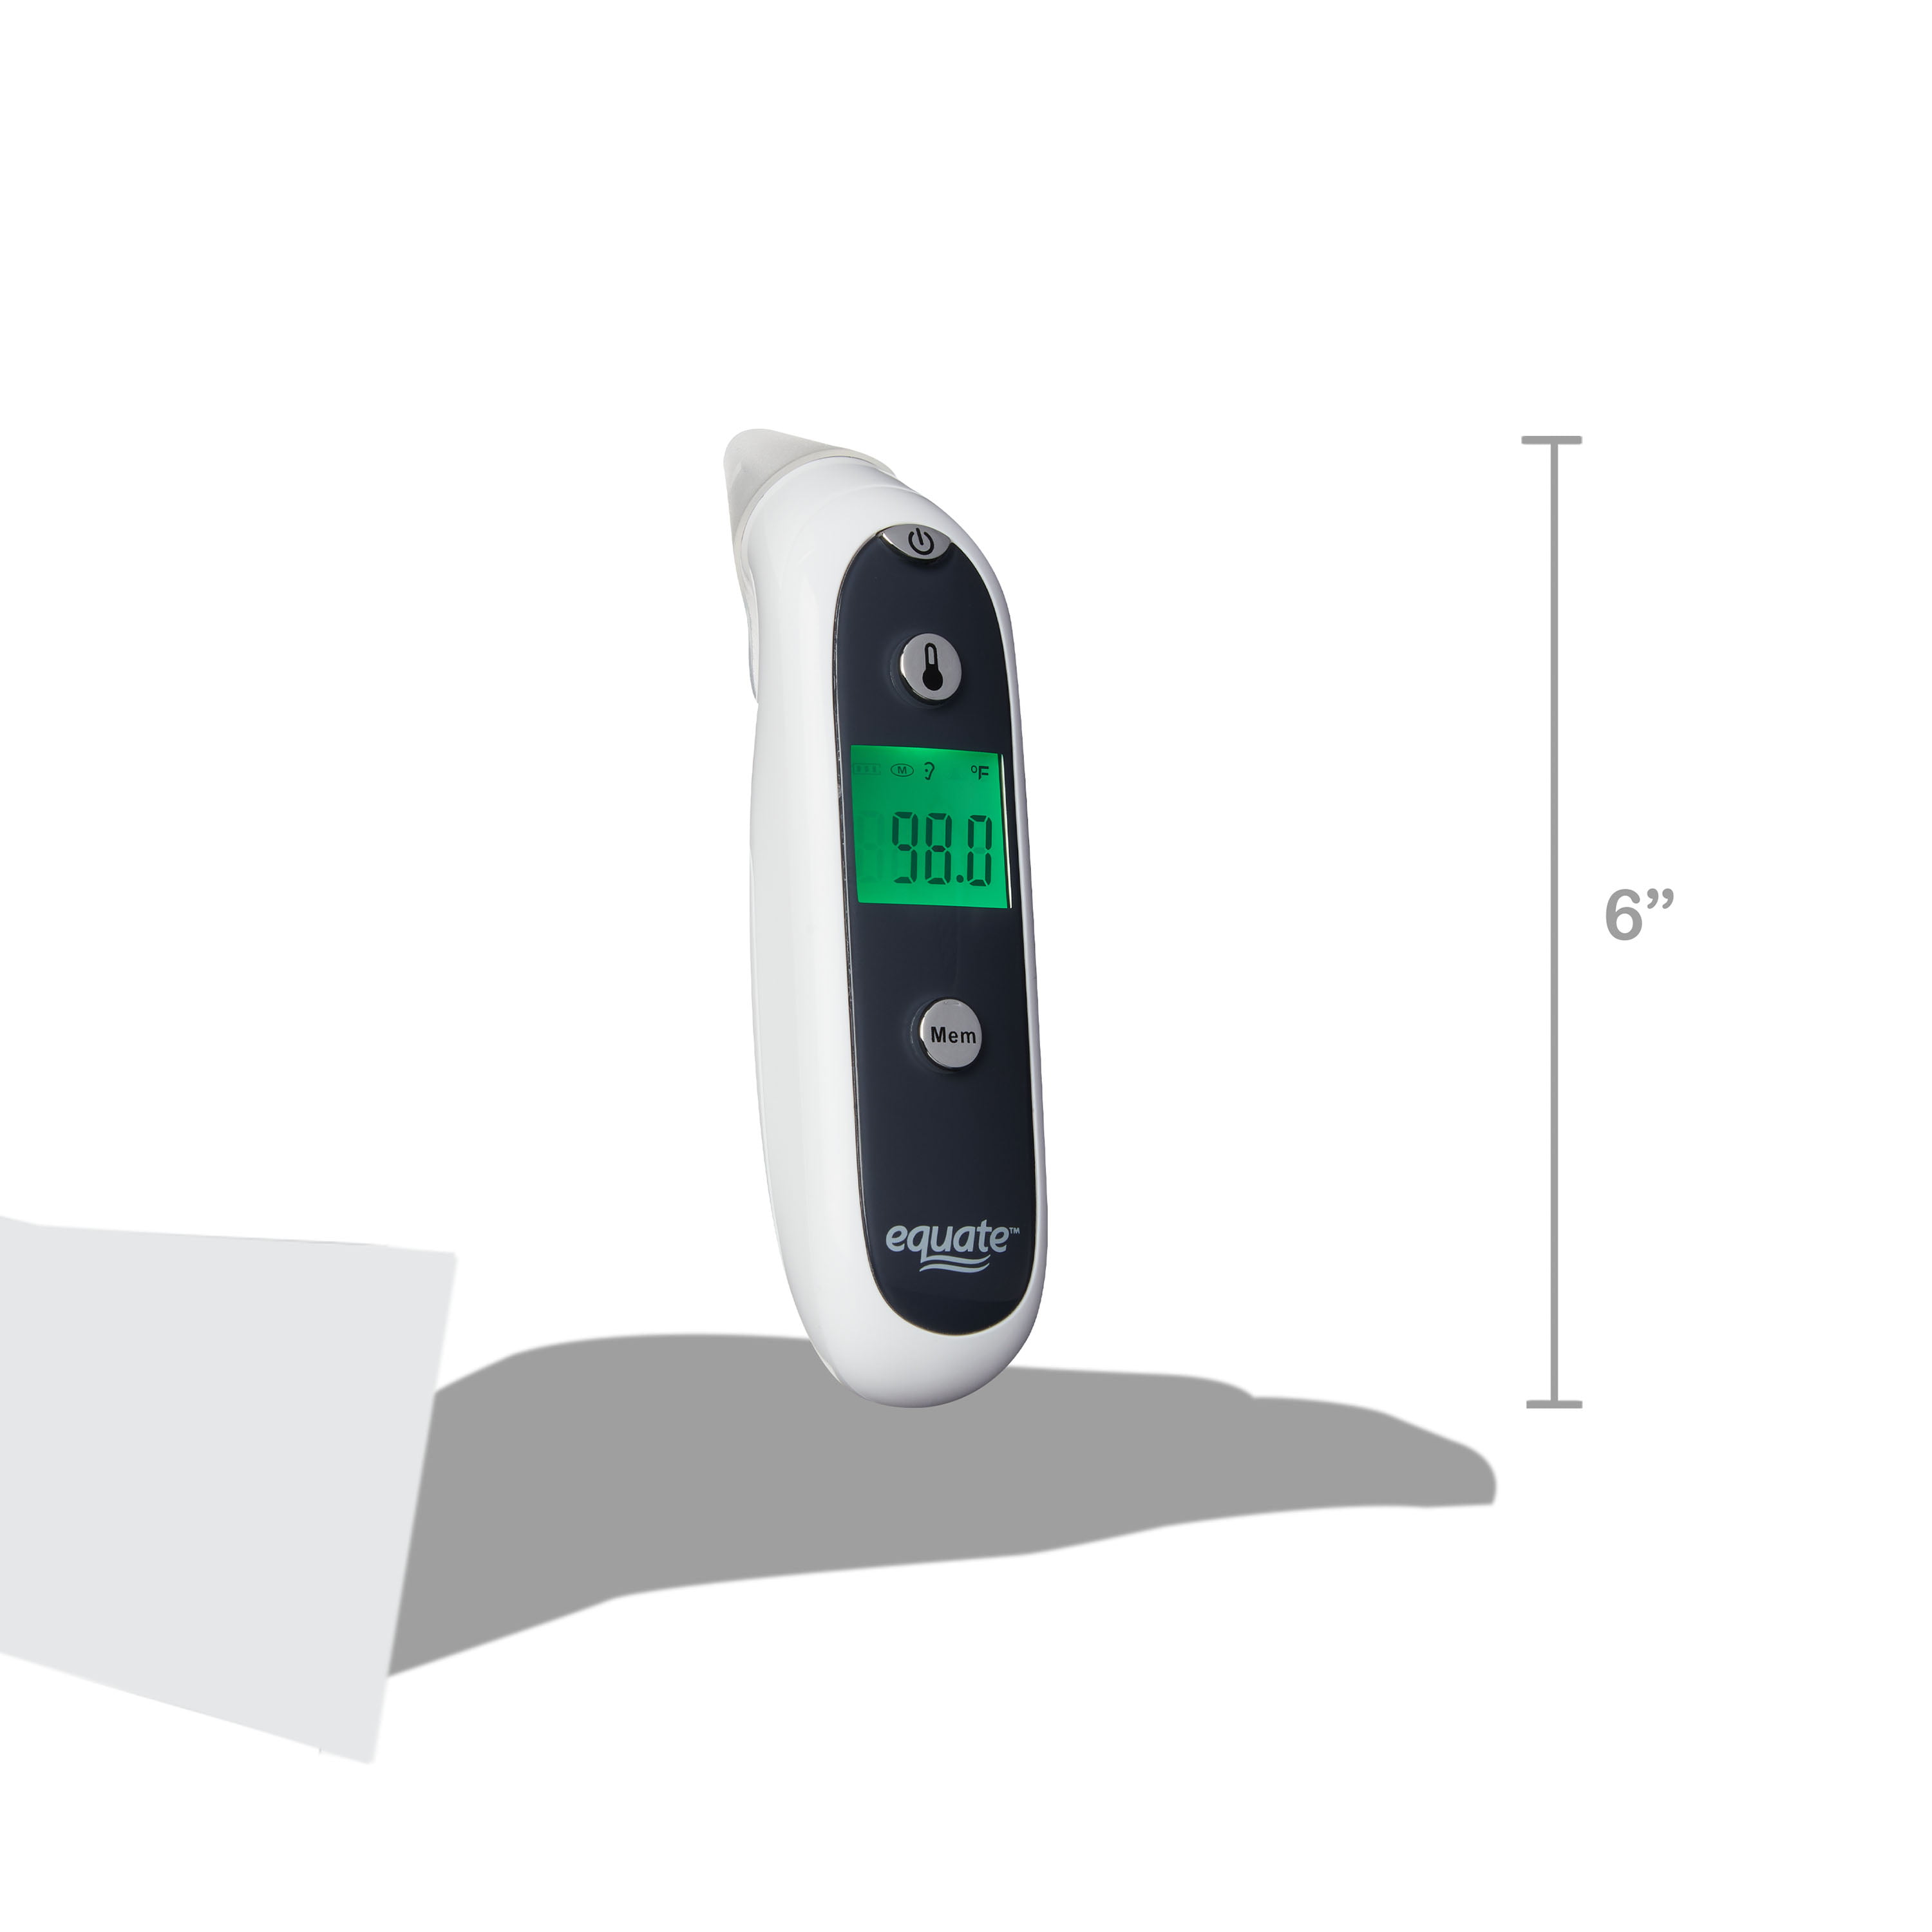 Talking Ear/Forehead Thermometer Review 